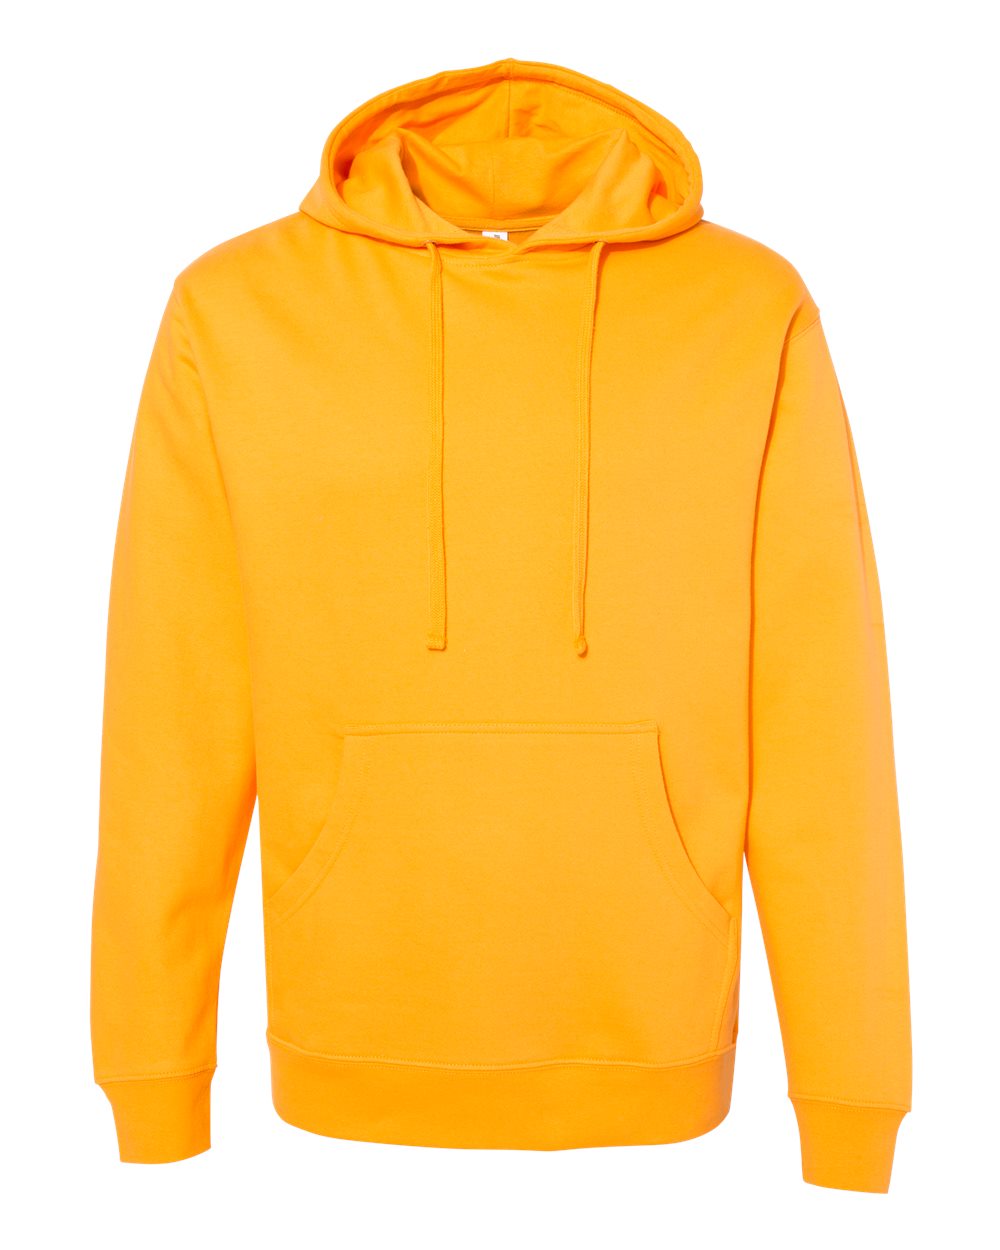 Independent Midweight Hooded Sweatshirt - SS4500